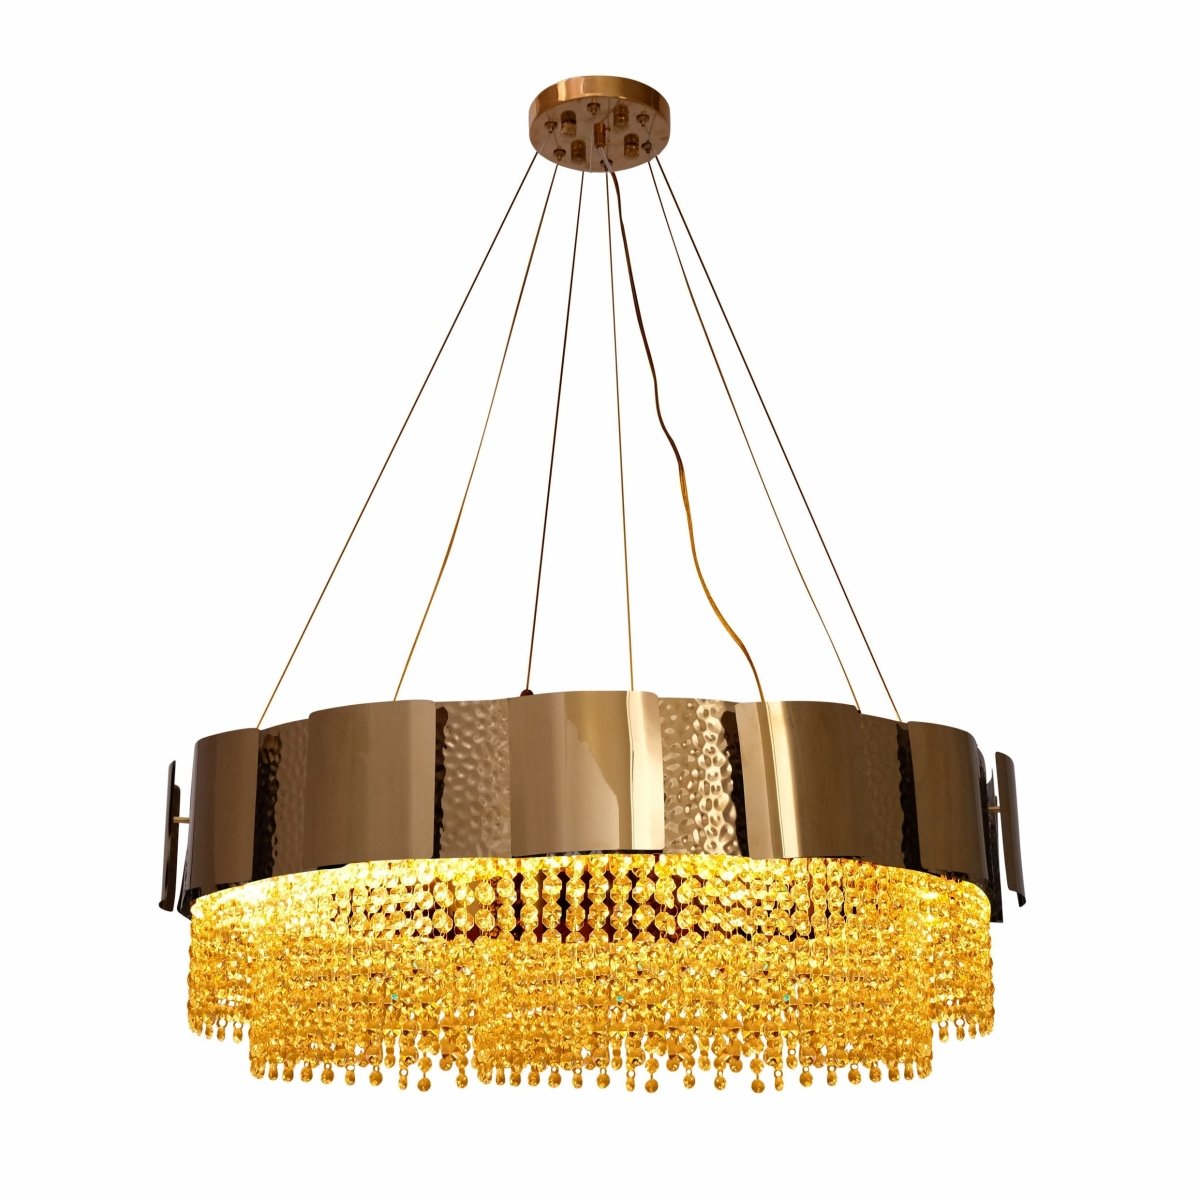 Main image of Octagon Crystal Gold Metal Chandelier D800 with 12xE14 Fitting | TEKLED 156-19578